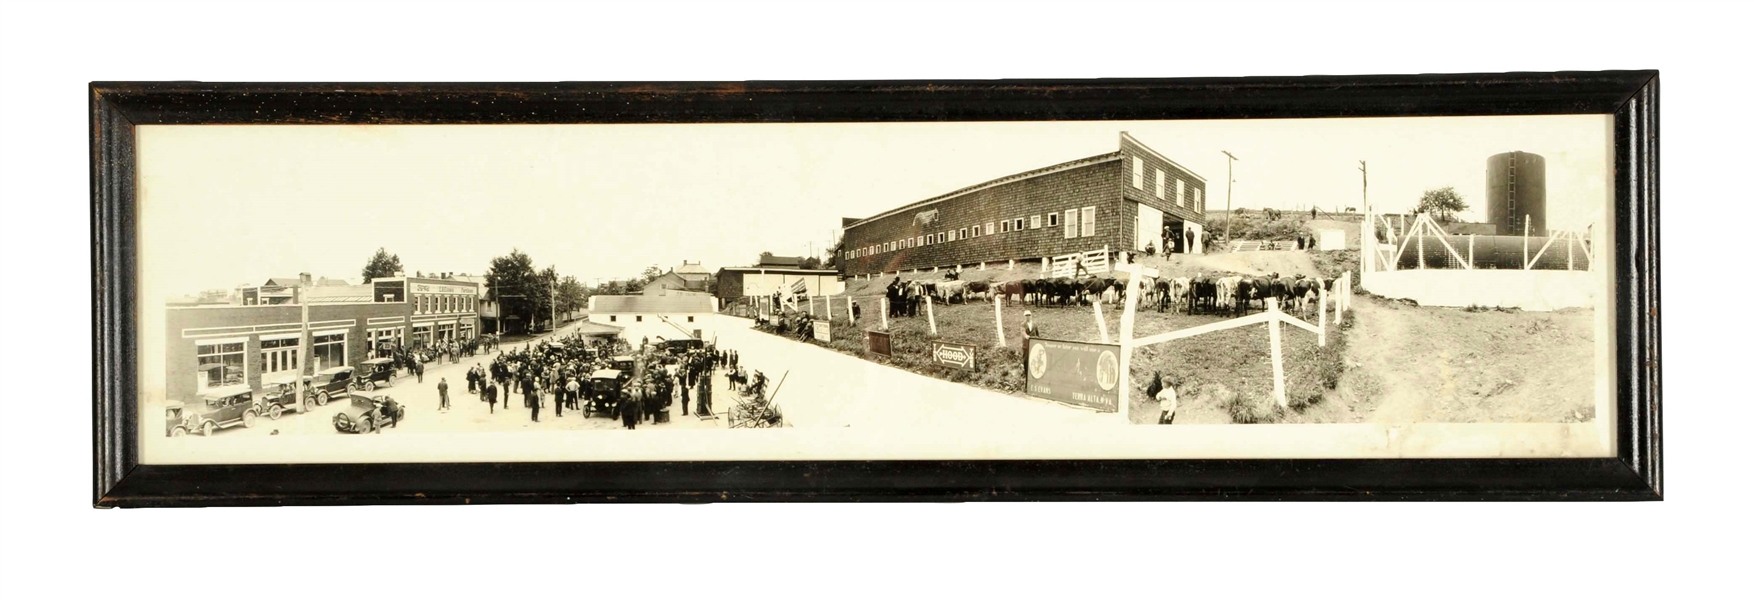 1920S PANARAMIC PHOTOGRAPHIC OF AUCTION SCENE W/ FORD DEALER.